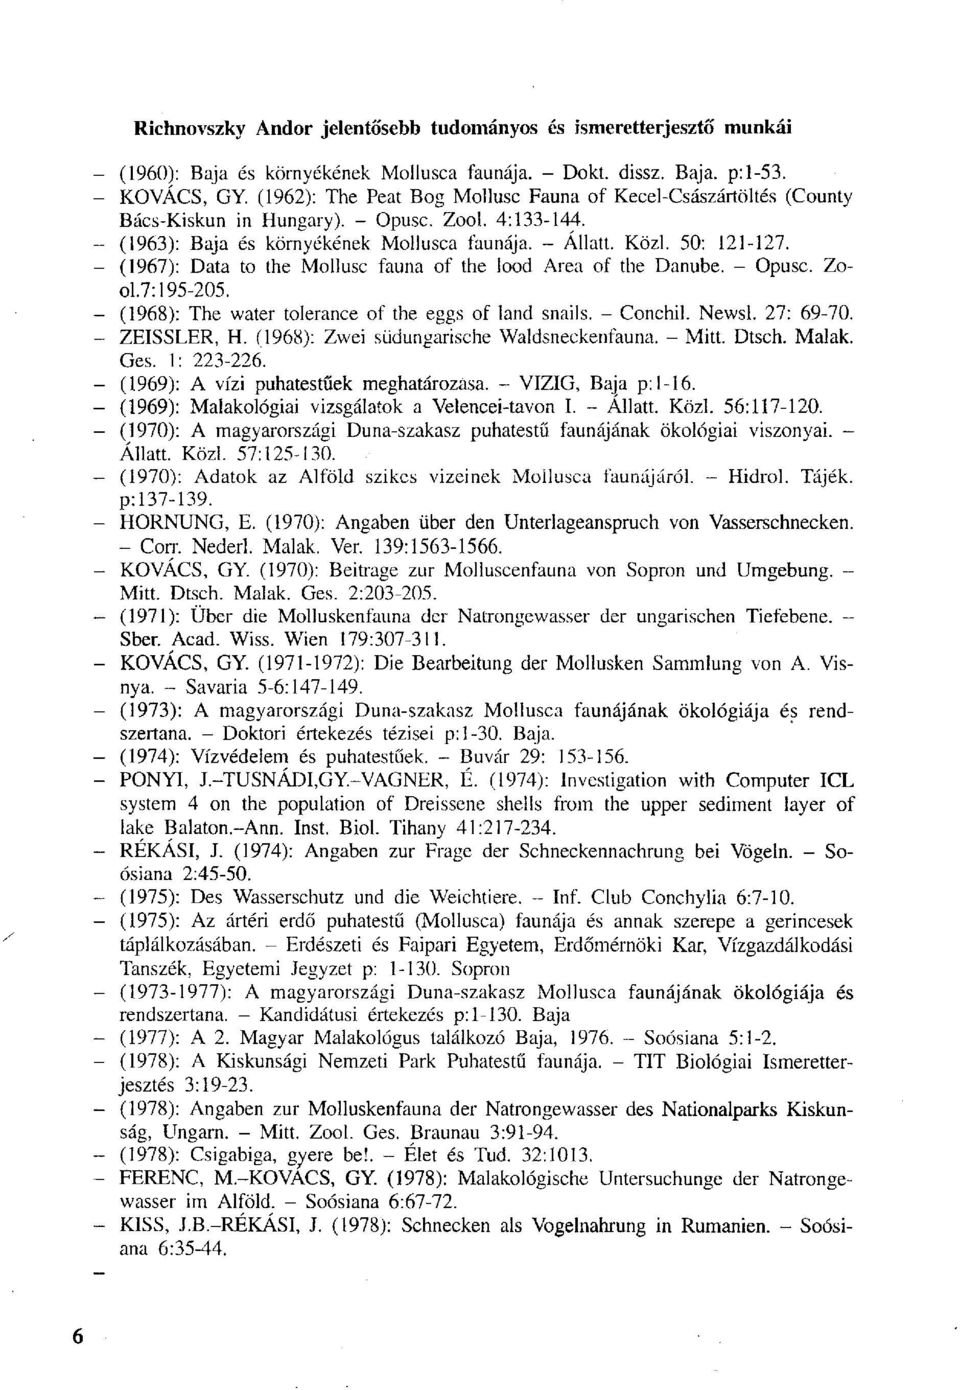 (1967) : Data to the Mollusc fauna of the lood Area of the Danube. - Opusc. Zool.7:195-205. (1968) : The water tolerance of the eggs of land snails. - Conchil. Newsl. 27: 69-70. ZEISSLER, H.